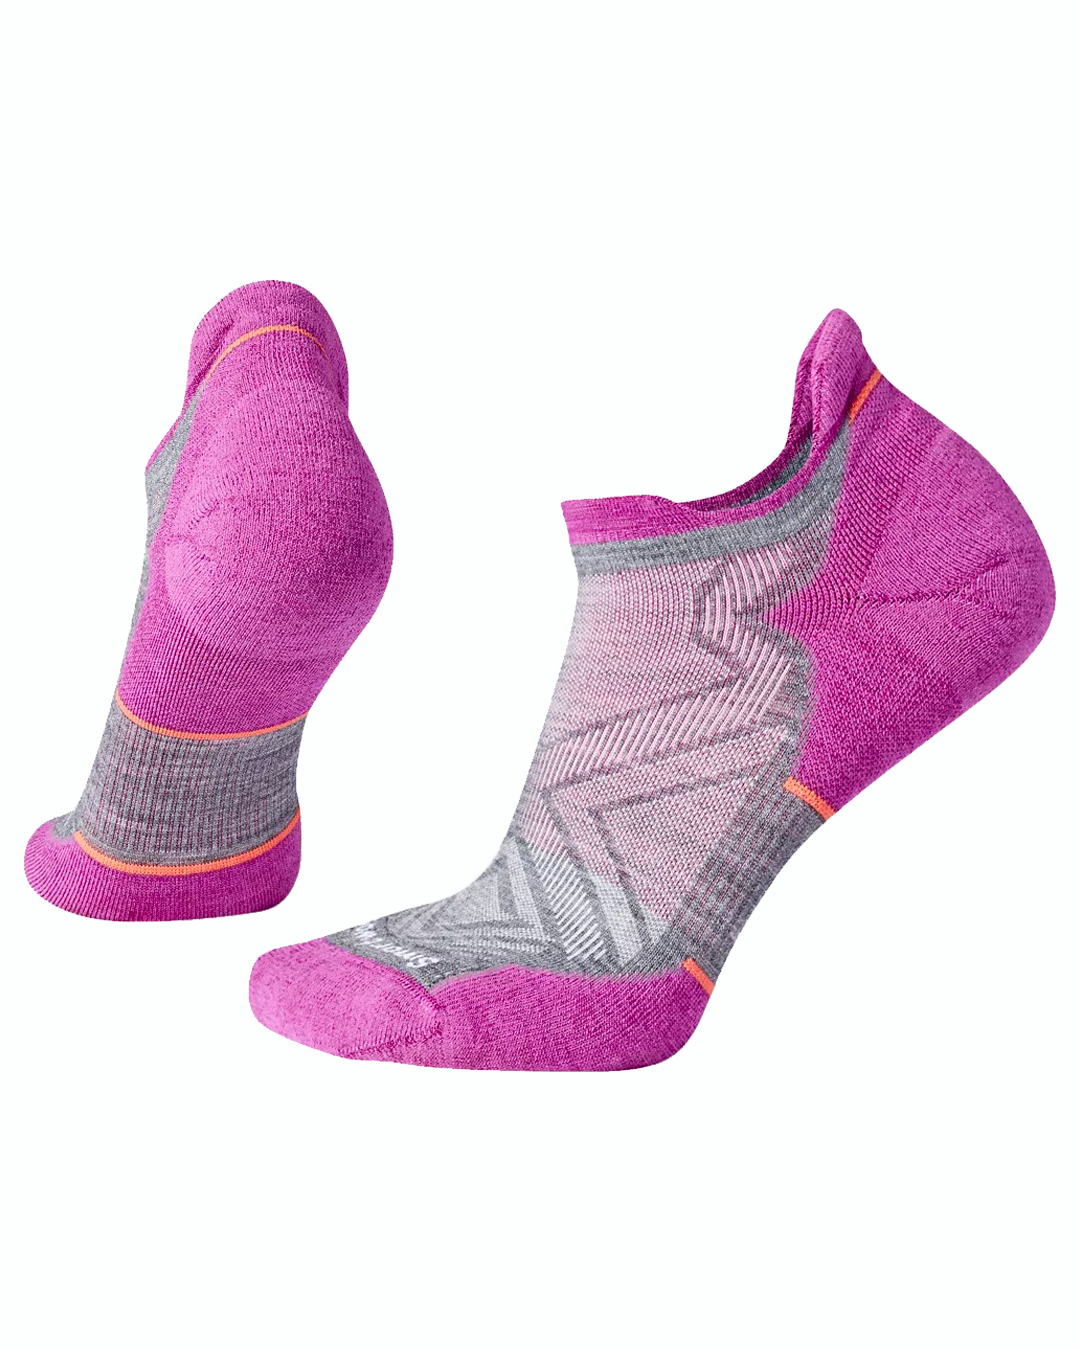 Run-Targeted Cushion Low Ankle Socks